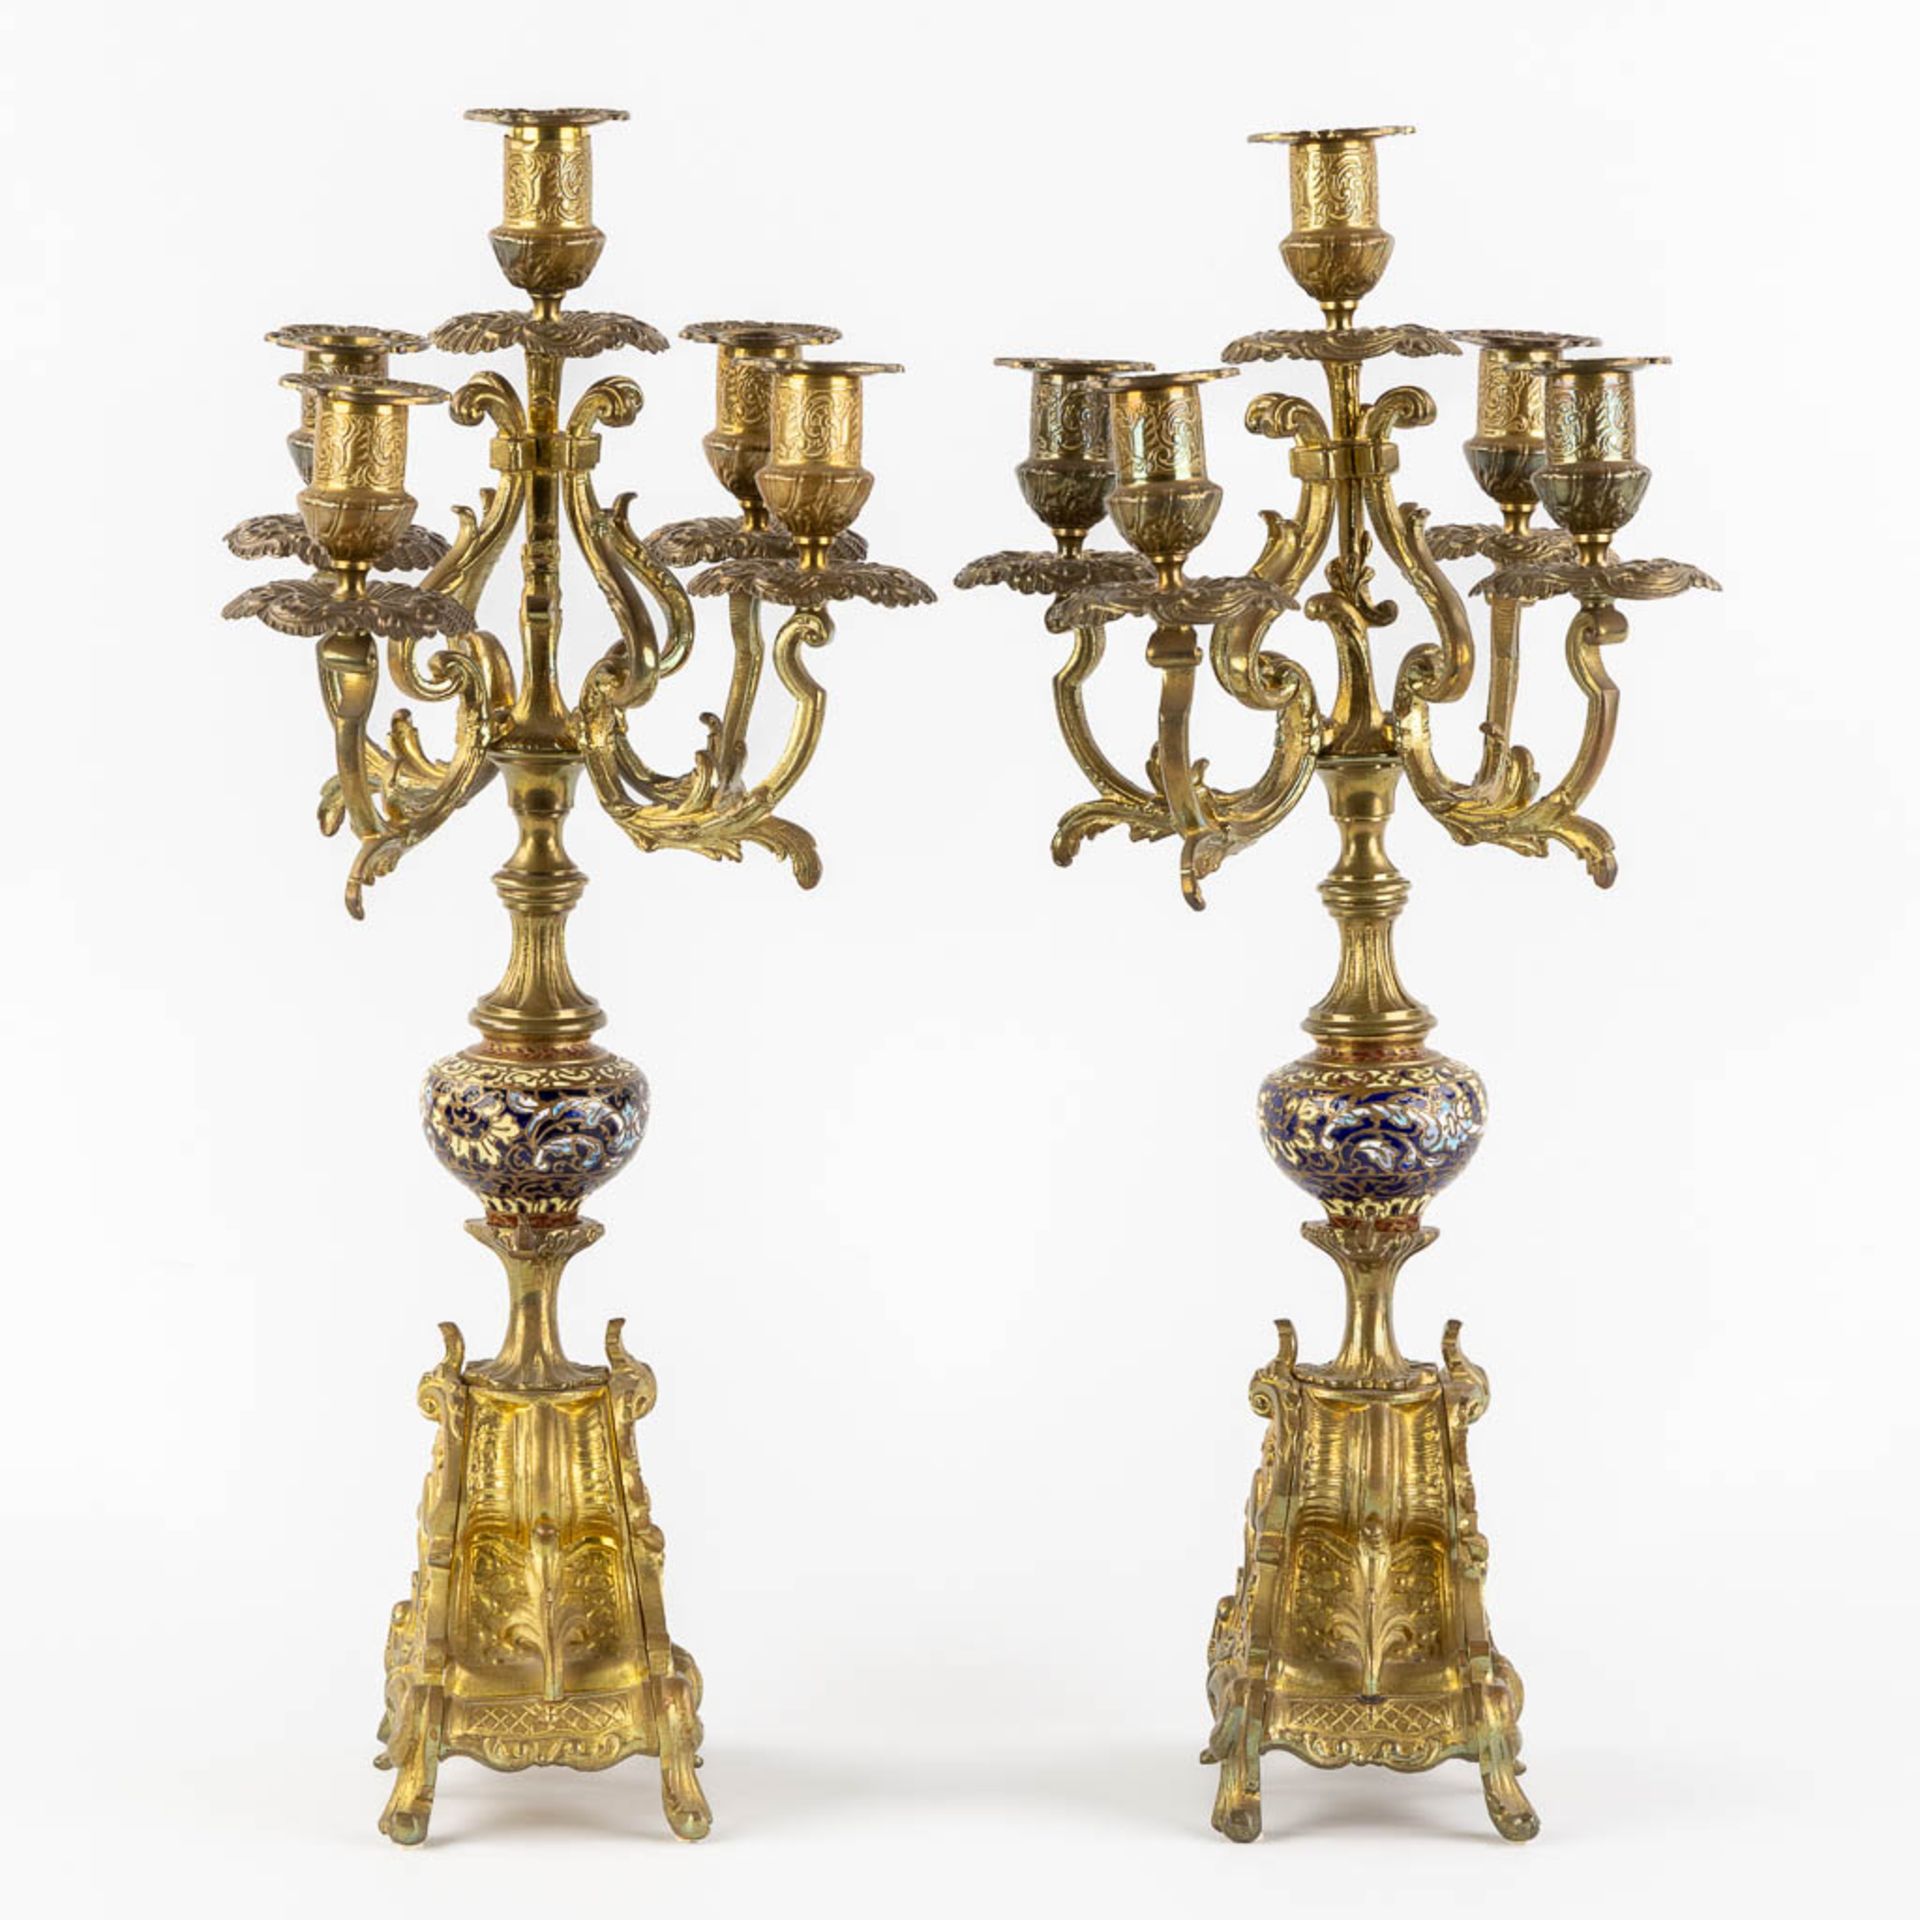 Two pairs of candelabra, bronze and cloisonné, Empire and Louis XVI style. (H:49 x D:26 cm) - Bild 4 aus 18